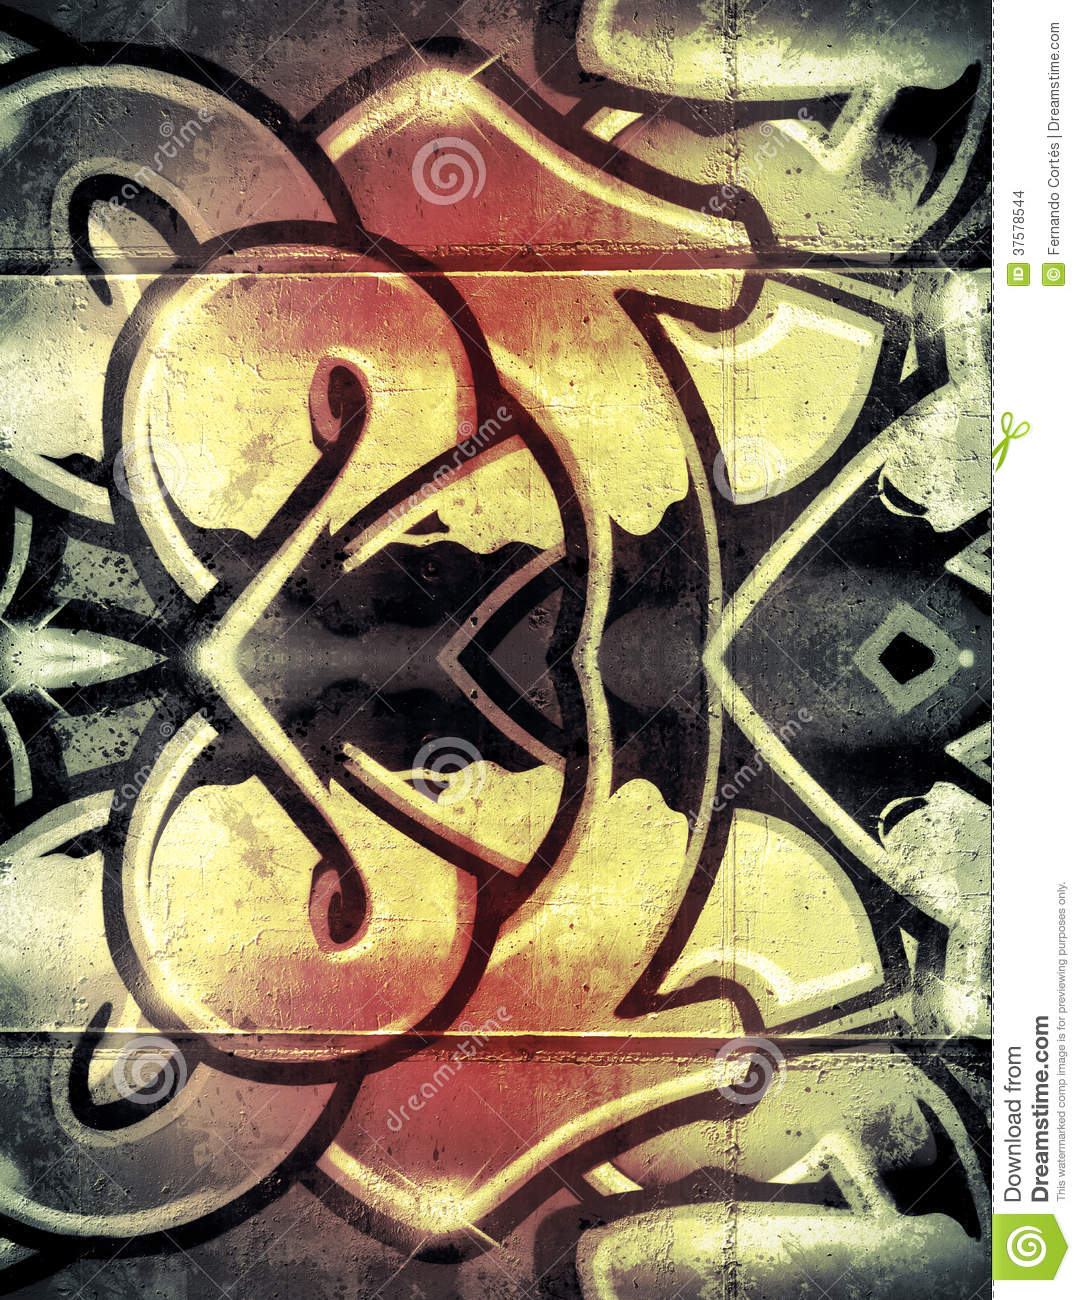     Old Dirty Wall Urban Hip Hop Backgroun Stock Images   Image  37578544